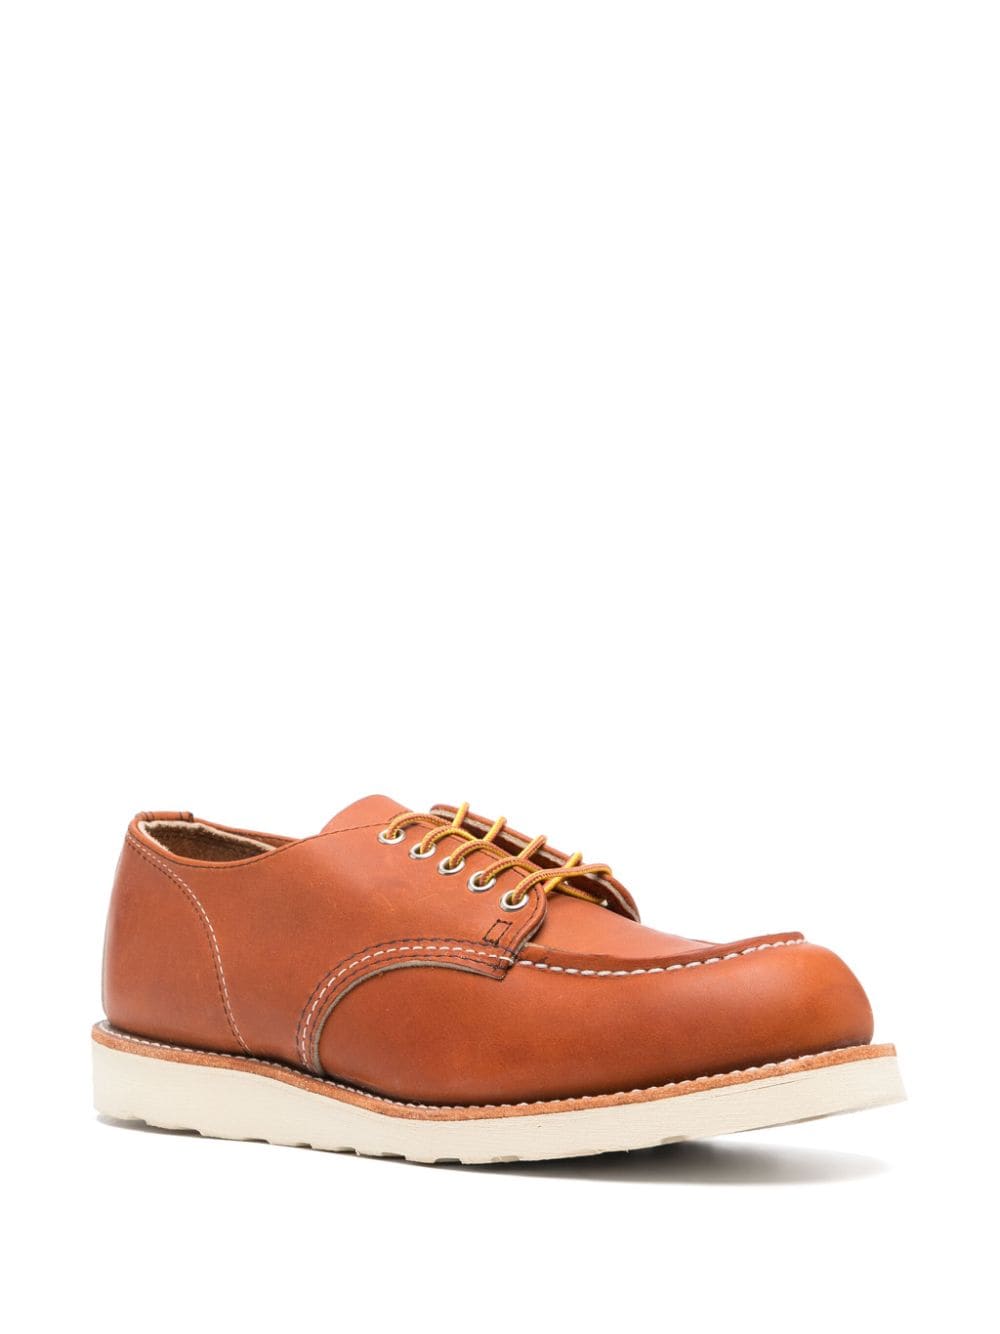 Red Wing Shoes Shop Moc leather derby shoes - Bruin